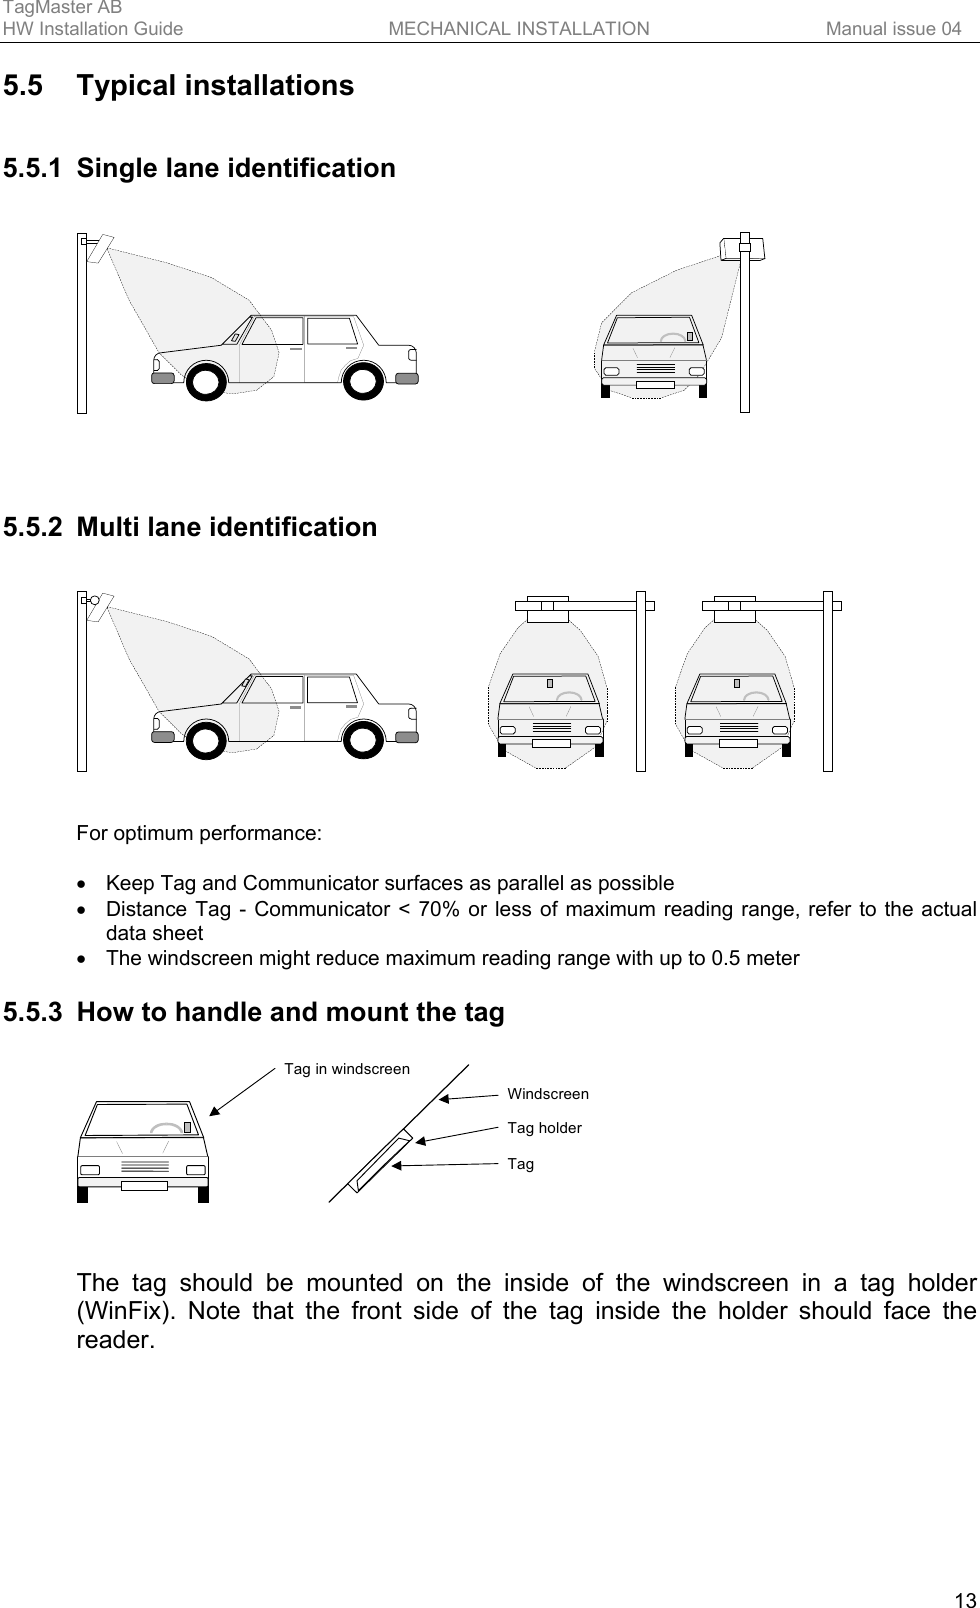 TagMaster AB     HW Installation Guide  MECHANICAL INSTALLATION  Manual issue 04  13 5.5 Typical installations 5.5.1  Single lane identification      5.5.2  Multi lane identification     For optimum performance:  •  Keep Tag and Communicator surfaces as parallel as possible •  Distance Tag - Communicator &lt; 70% or less of maximum reading range, refer to the actual data sheet •  The windscreen might reduce maximum reading range with up to 0.5 meter  5.5.3  How to handle and mount the tag  WindscreenTag holderTagTag in windscreen  The tag should be mounted on the inside of the windscreen in a tag holder (WinFix). Note that the front side of the tag inside the holder should face the reader.  